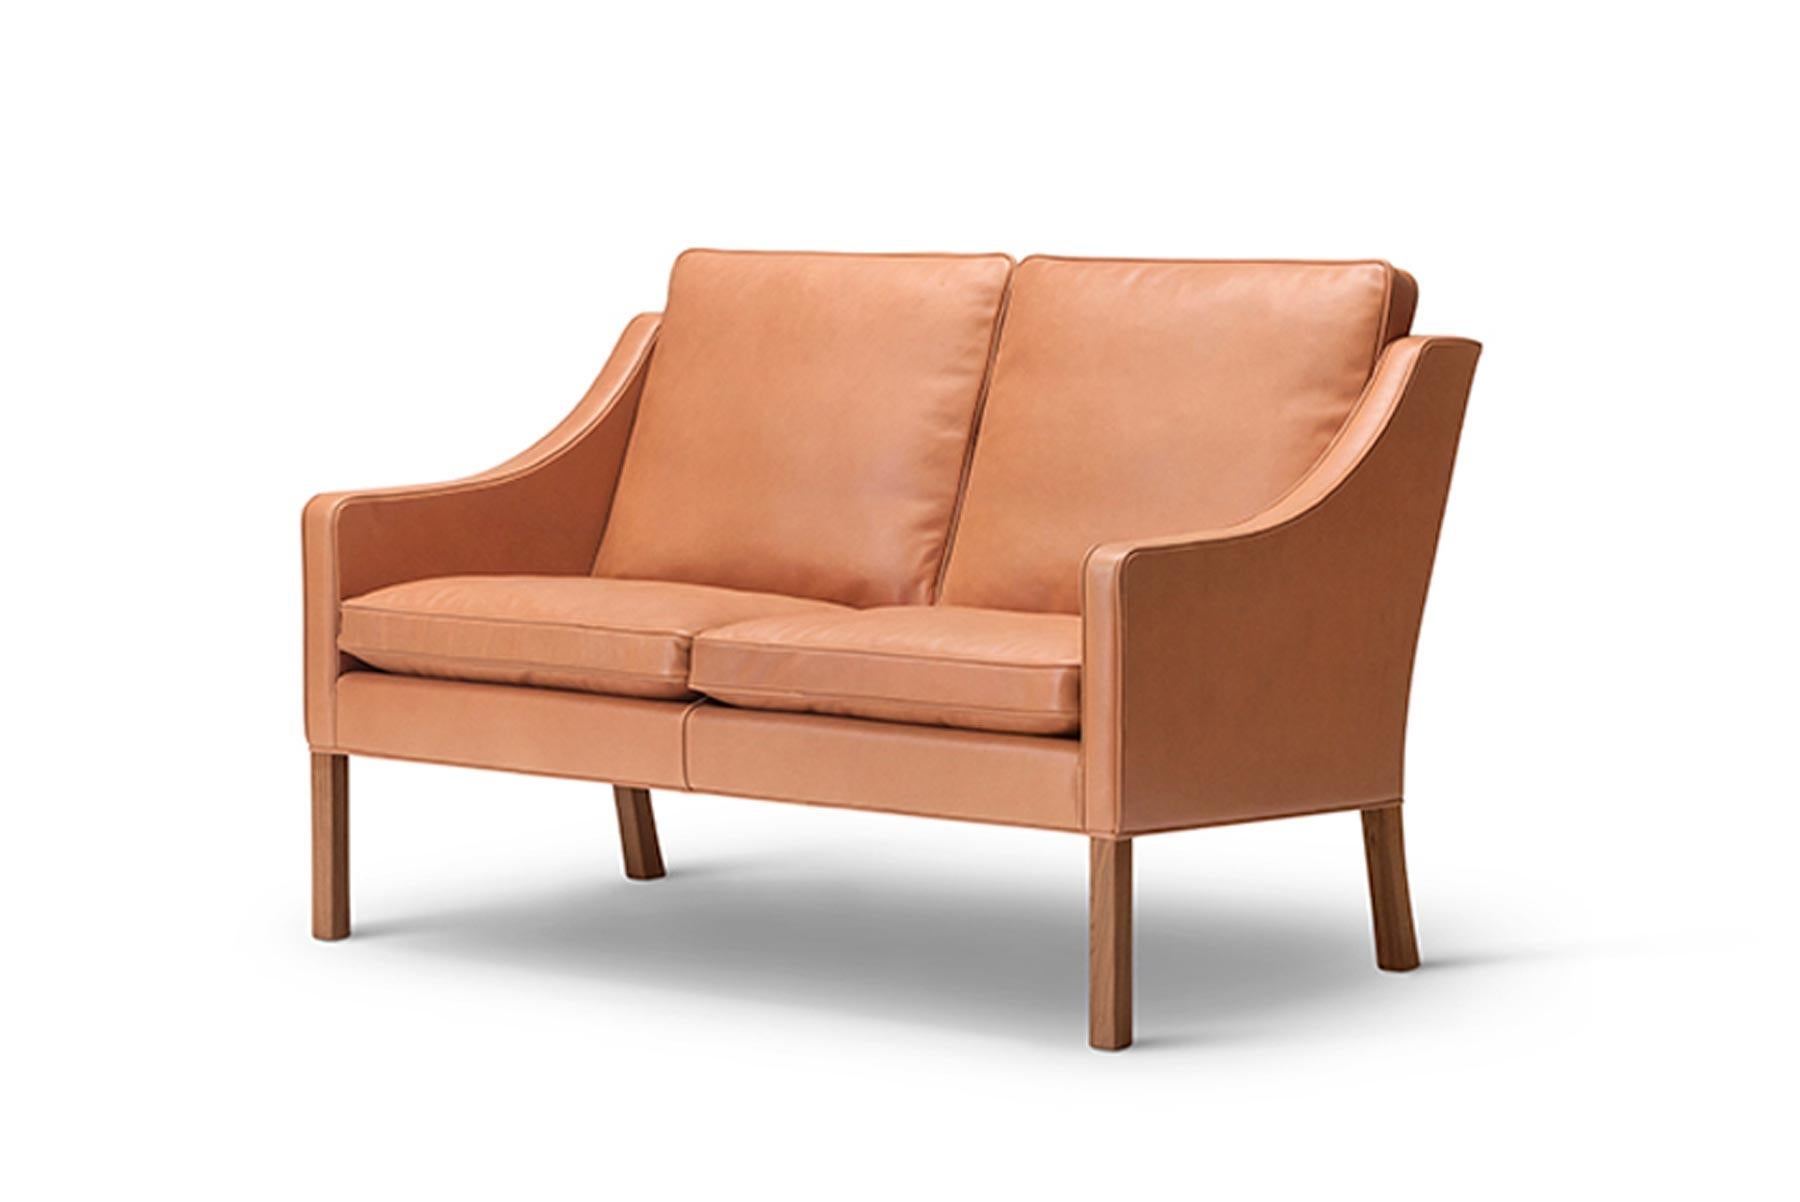 The 2208 two seater sofa features an elegantly curved lowered back and was designed by Børge Mogensen in 1963.